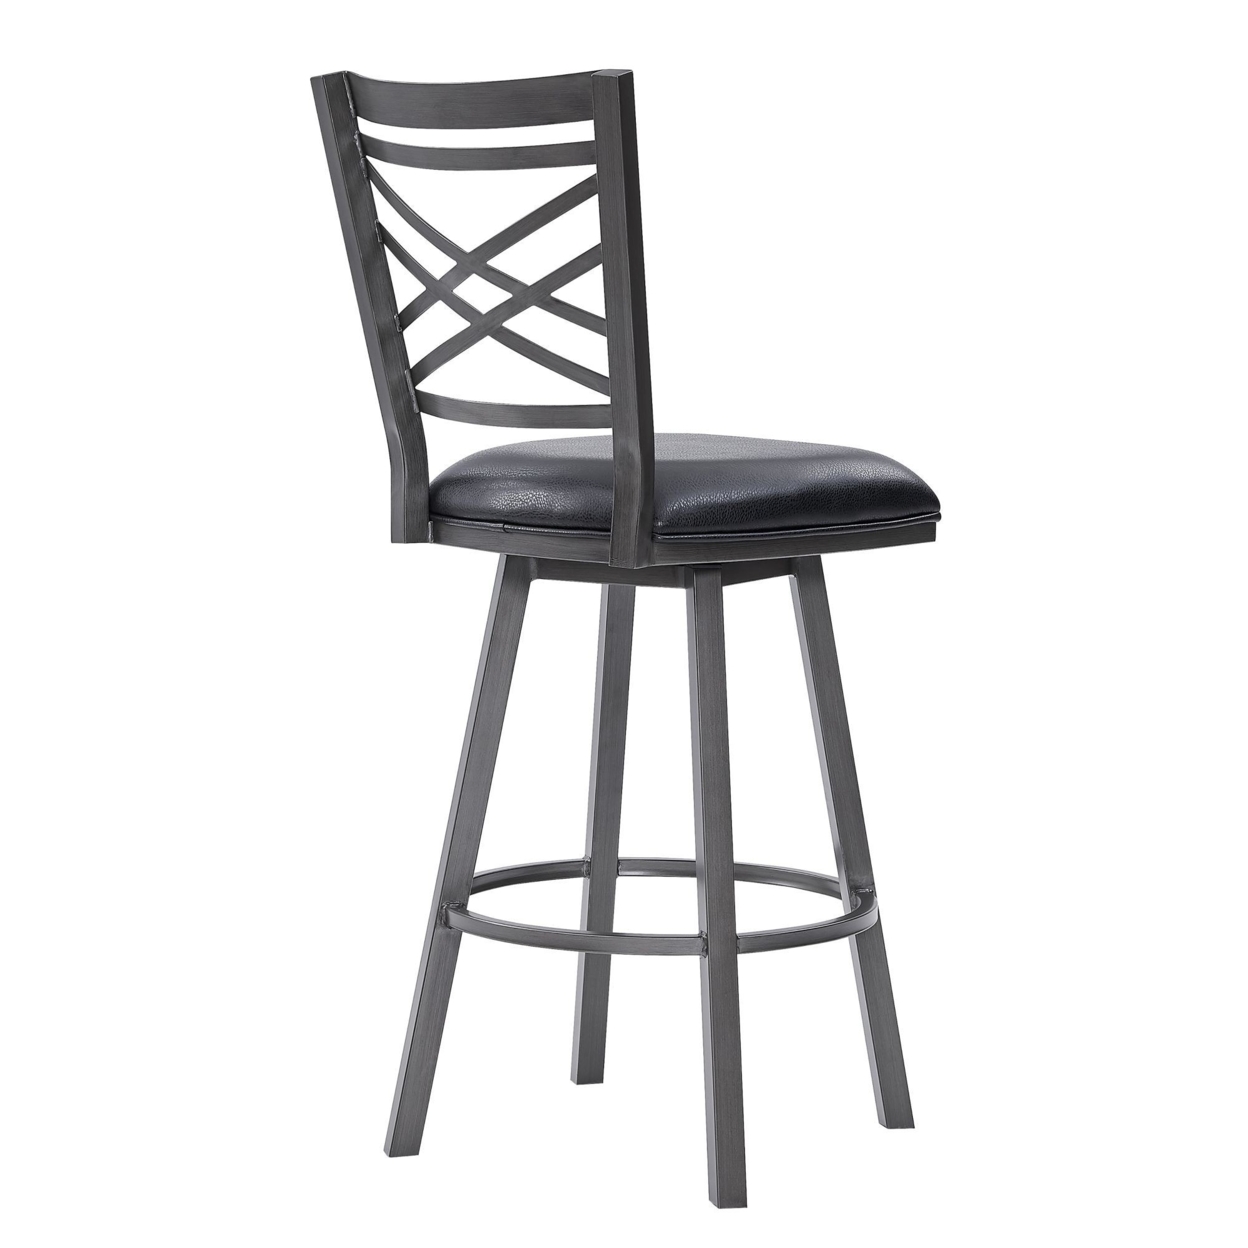 30 Inches Metal Cross Back Counter Barstool With Leatherette Seat, Gray- Saltoro Sherpi